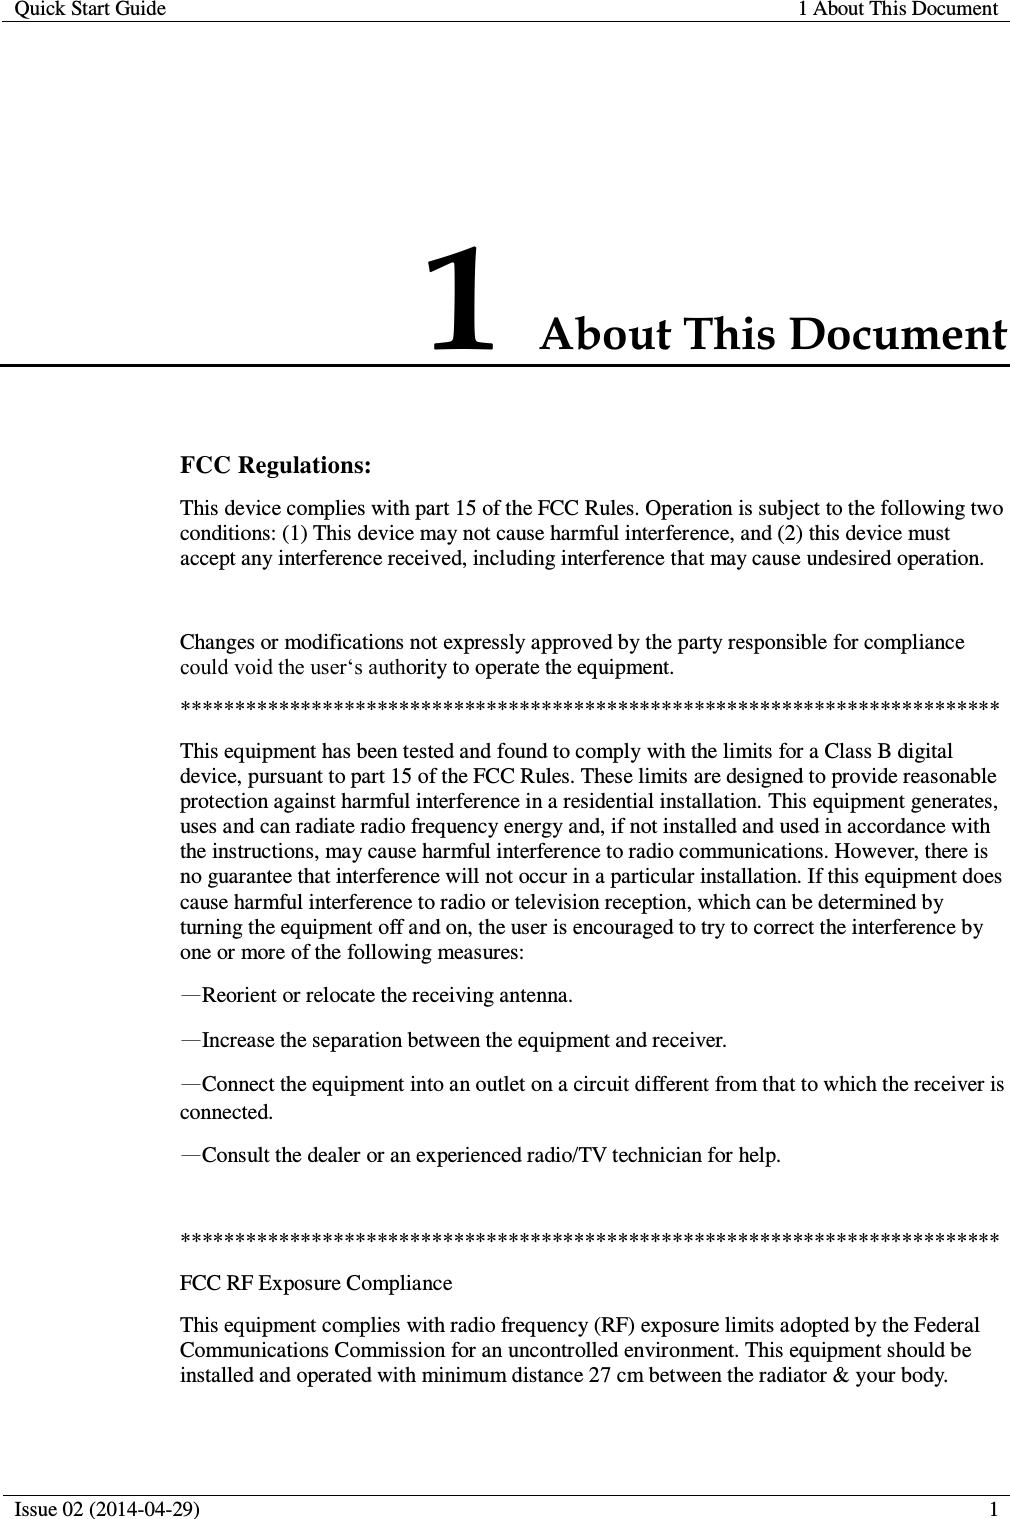  Quick Start Guide 1 About This Document  Issue 02 (2014-04-29)  1  1 About This Document FCC Regulations: This device complies with part 15 of the FCC Rules. Operation is subject to the following two conditions: (1) This device may not cause harmful interference, and (2) this device must accept any interference received, including interference that may cause undesired operation.  Changes or modifications not expressly approved by the party responsible for compliance could void the user‘s authority to operate the equipment. *************************************************************************** This equipment has been tested and found to comply with the limits for a Class B digital device, pursuant to part 15 of the FCC Rules. These limits are designed to provide reasonable protection against harmful interference in a residential installation. This equipment generates, uses and can radiate radio frequency energy and, if not installed and used in accordance with the instructions, may cause harmful interference to radio communications. However, there is no guarantee that interference will not occur in a particular installation. If this equipment does cause harmful interference to radio or television reception, which can be determined by turning the equipment off and on, the user is encouraged to try to correct the interference by one or more of the following measures: —Reorient or relocate the receiving antenna. —Increase the separation between the equipment and receiver. —Connect the equipment into an outlet on a circuit different from that to which the receiver is connected. —Consult the dealer or an experienced radio/TV technician for help.  *************************************************************************** FCC RF Exposure Compliance This equipment complies with radio frequency (RF) exposure limits adopted by the Federal Communications Commission for an uncontrolled environment. This equipment should be installed and operated with minimum distance 27 cm between the radiator &amp; your body.